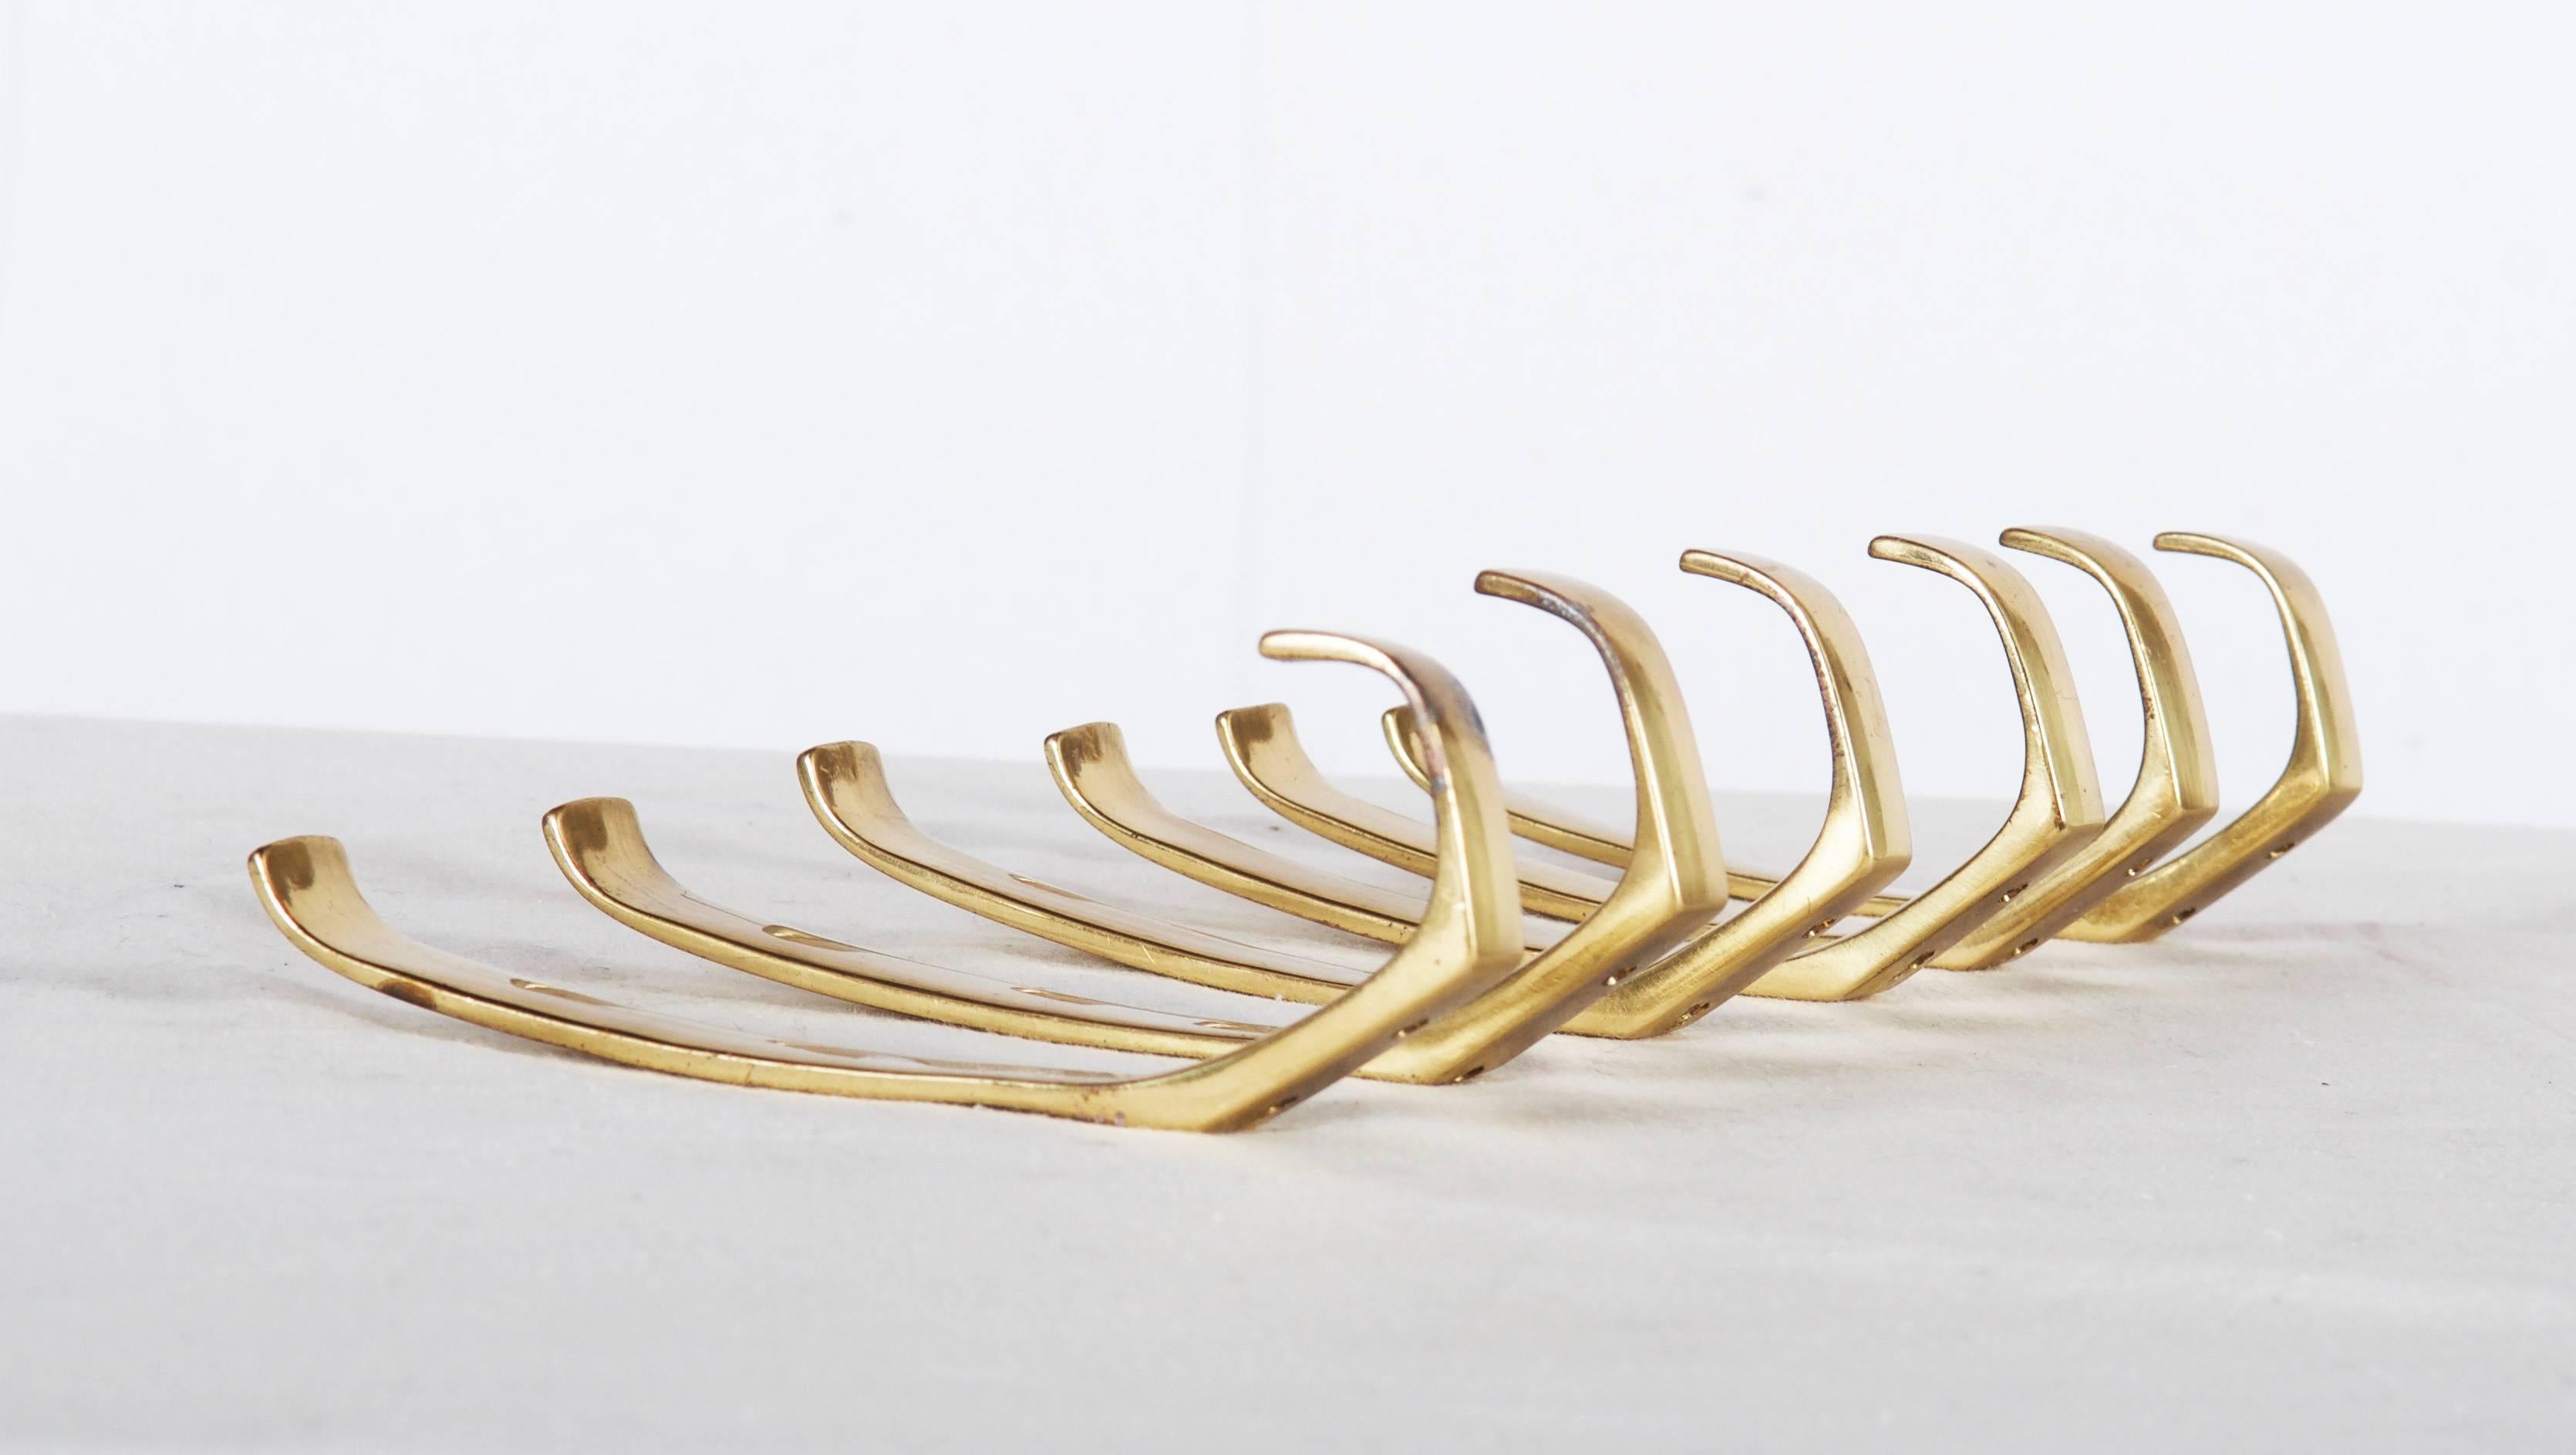 Brass coat, hat hooks, elegant shape and perfect quality by Hertha Baller from the 1950s.
    